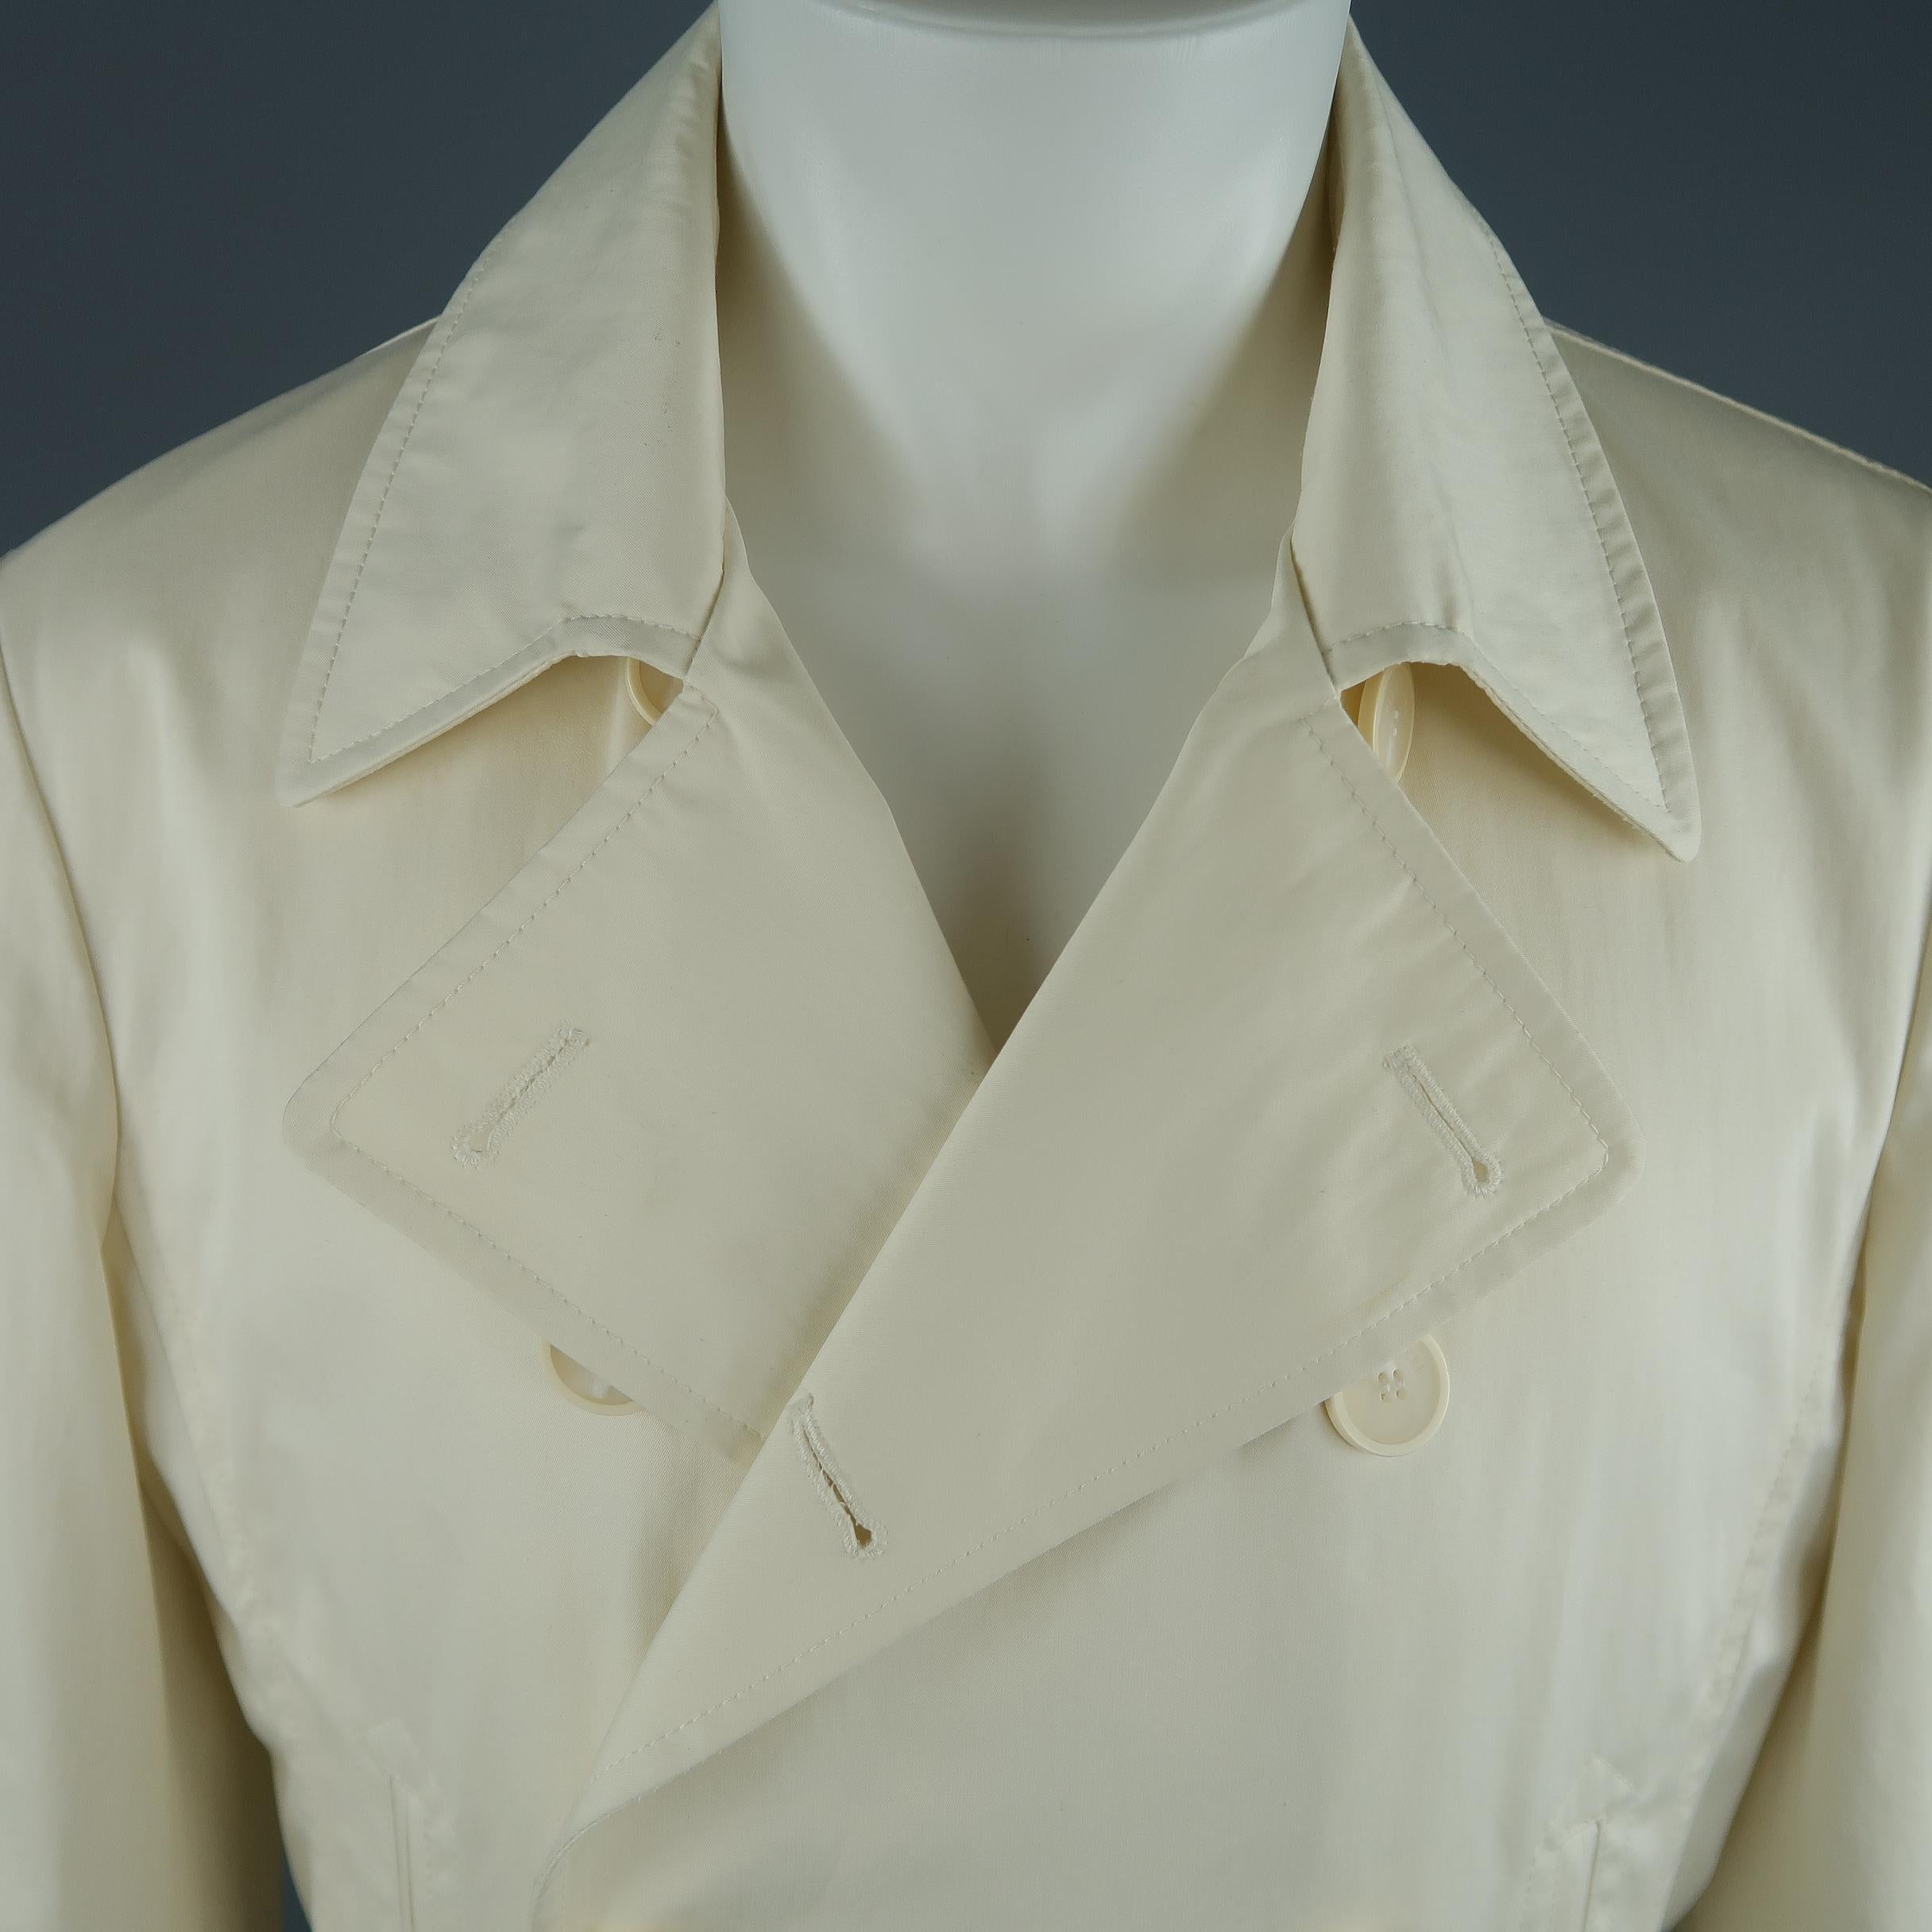 PAL ZILERI overcoat comes in light cream khaki cotton with a pointed lapel, double breasted button closure, and slit pockets. Made in Italy.
 
New with Tags Pre-Owned Condition.
Marked: 40
 
Measurements:
 
Shoulder: 18 in.
Chest: 46 in.
Sleeve: 26